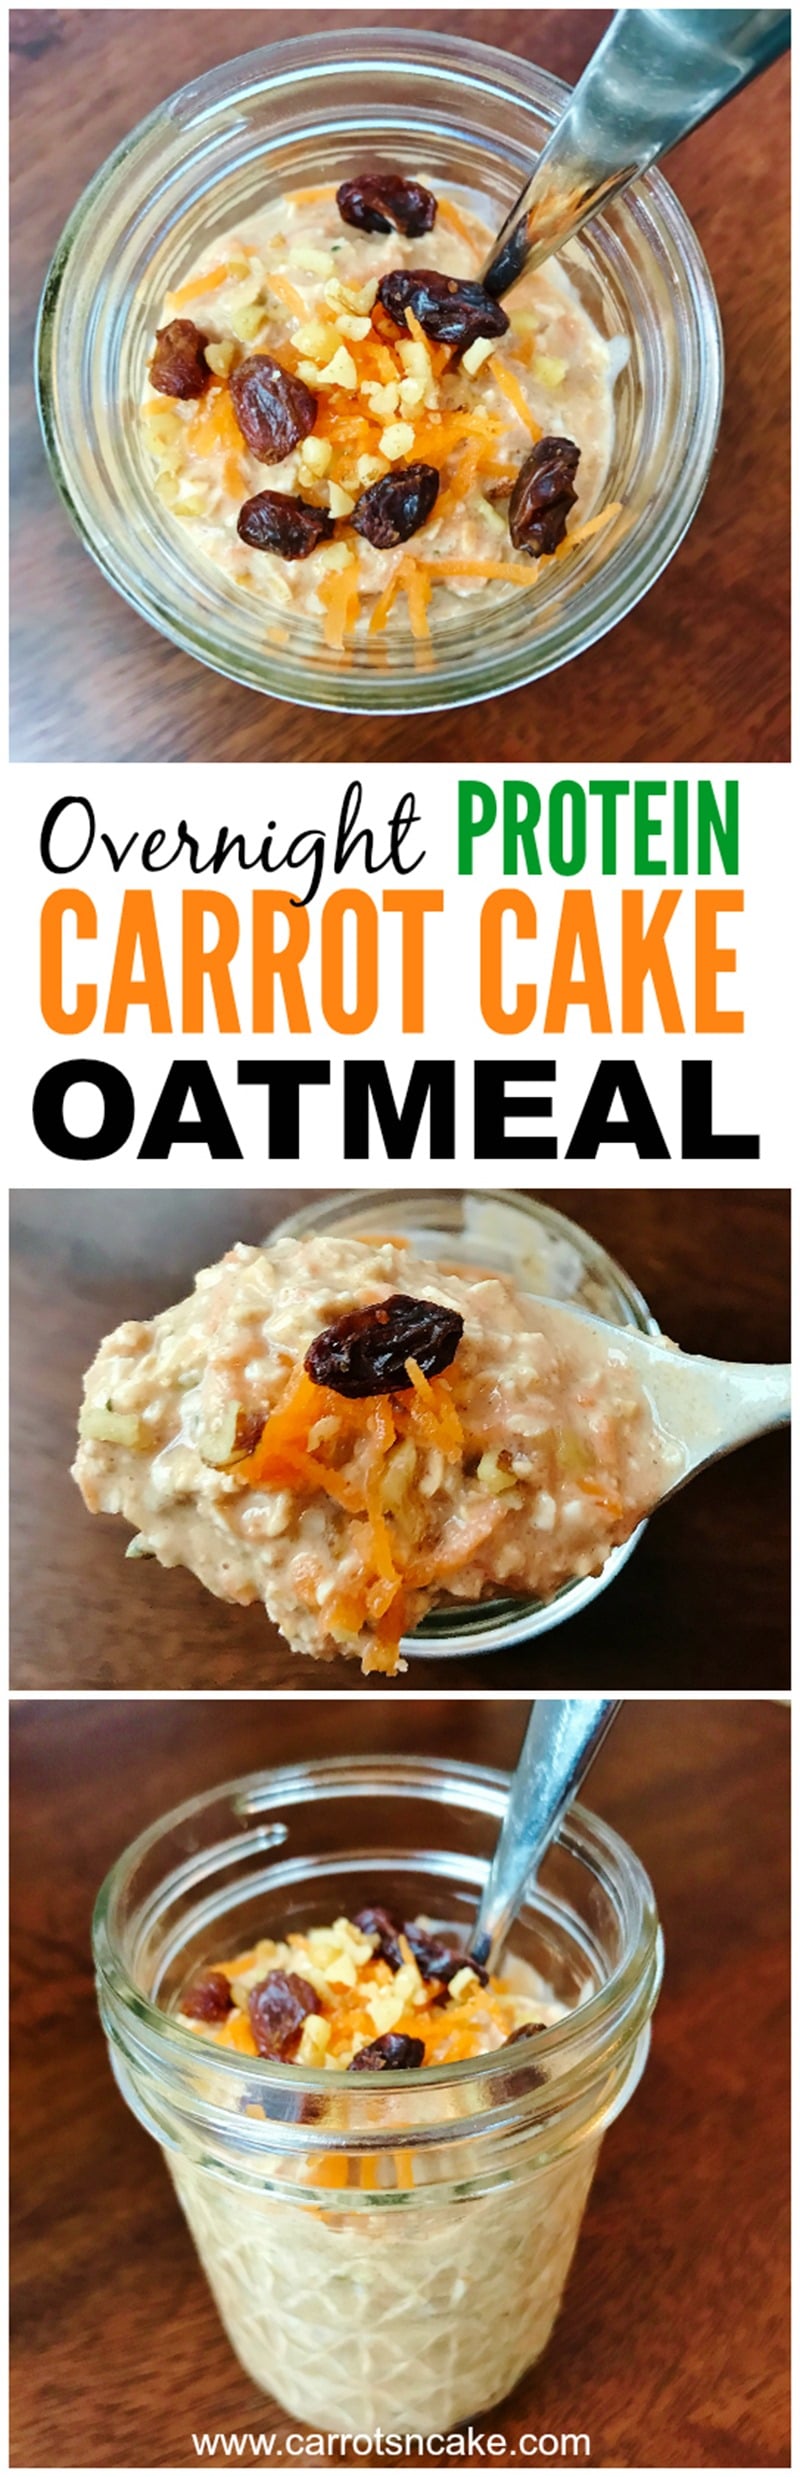 OVERNIGHT CARROT CAKE PROTEIN OATMEAL